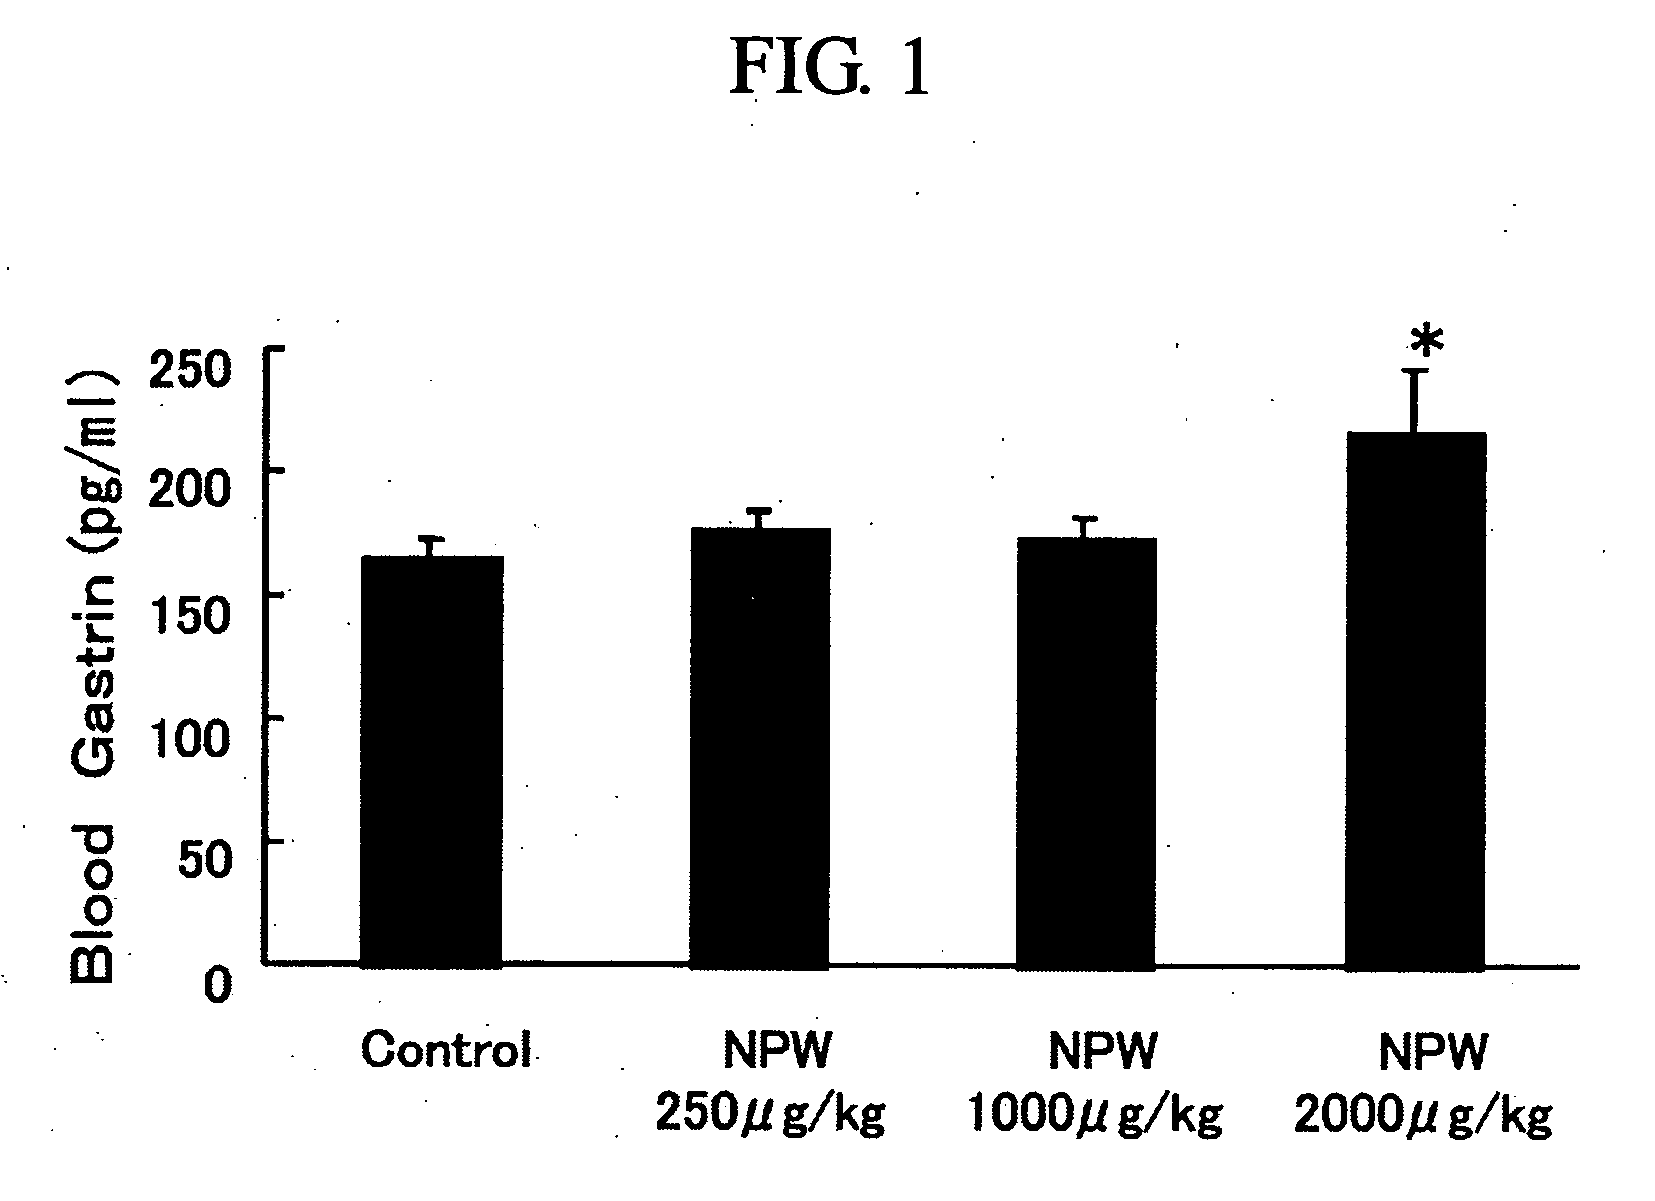 Agents for preventing and/or treating uppper digestive tract disorders